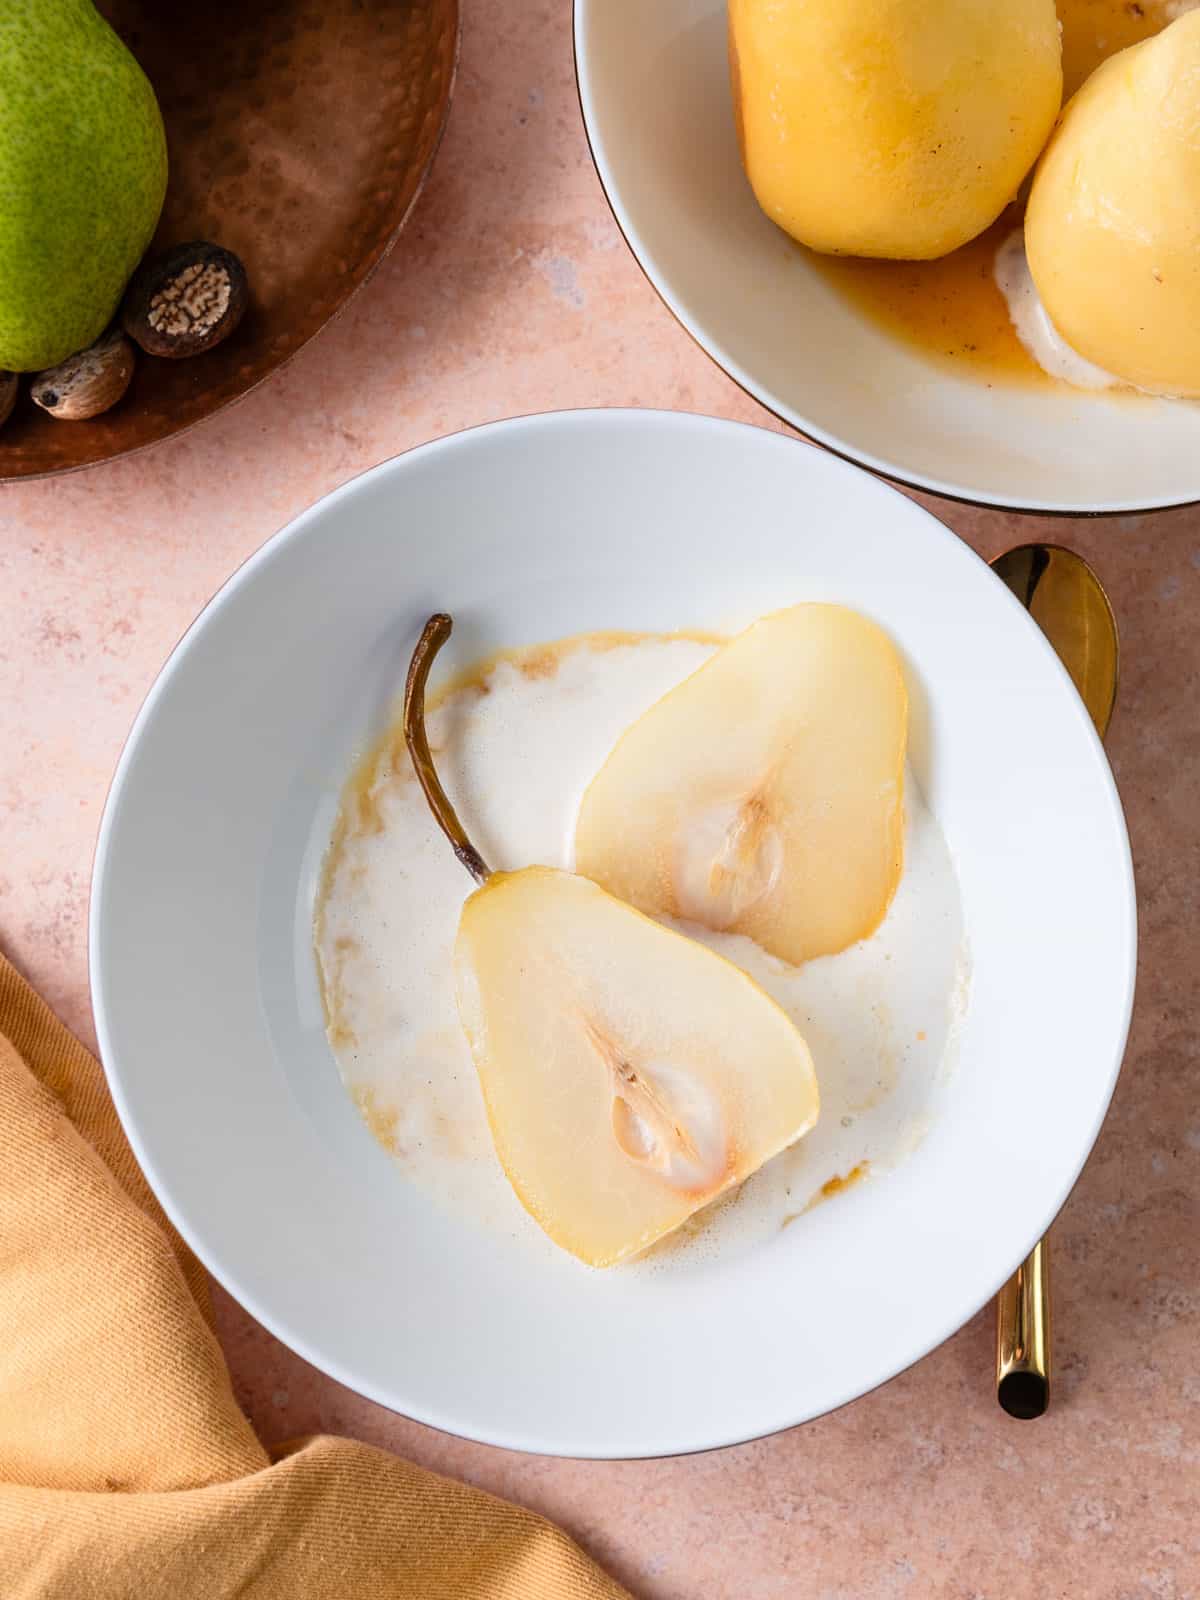 Poached pears cut in half and served with vanilla ice cream.